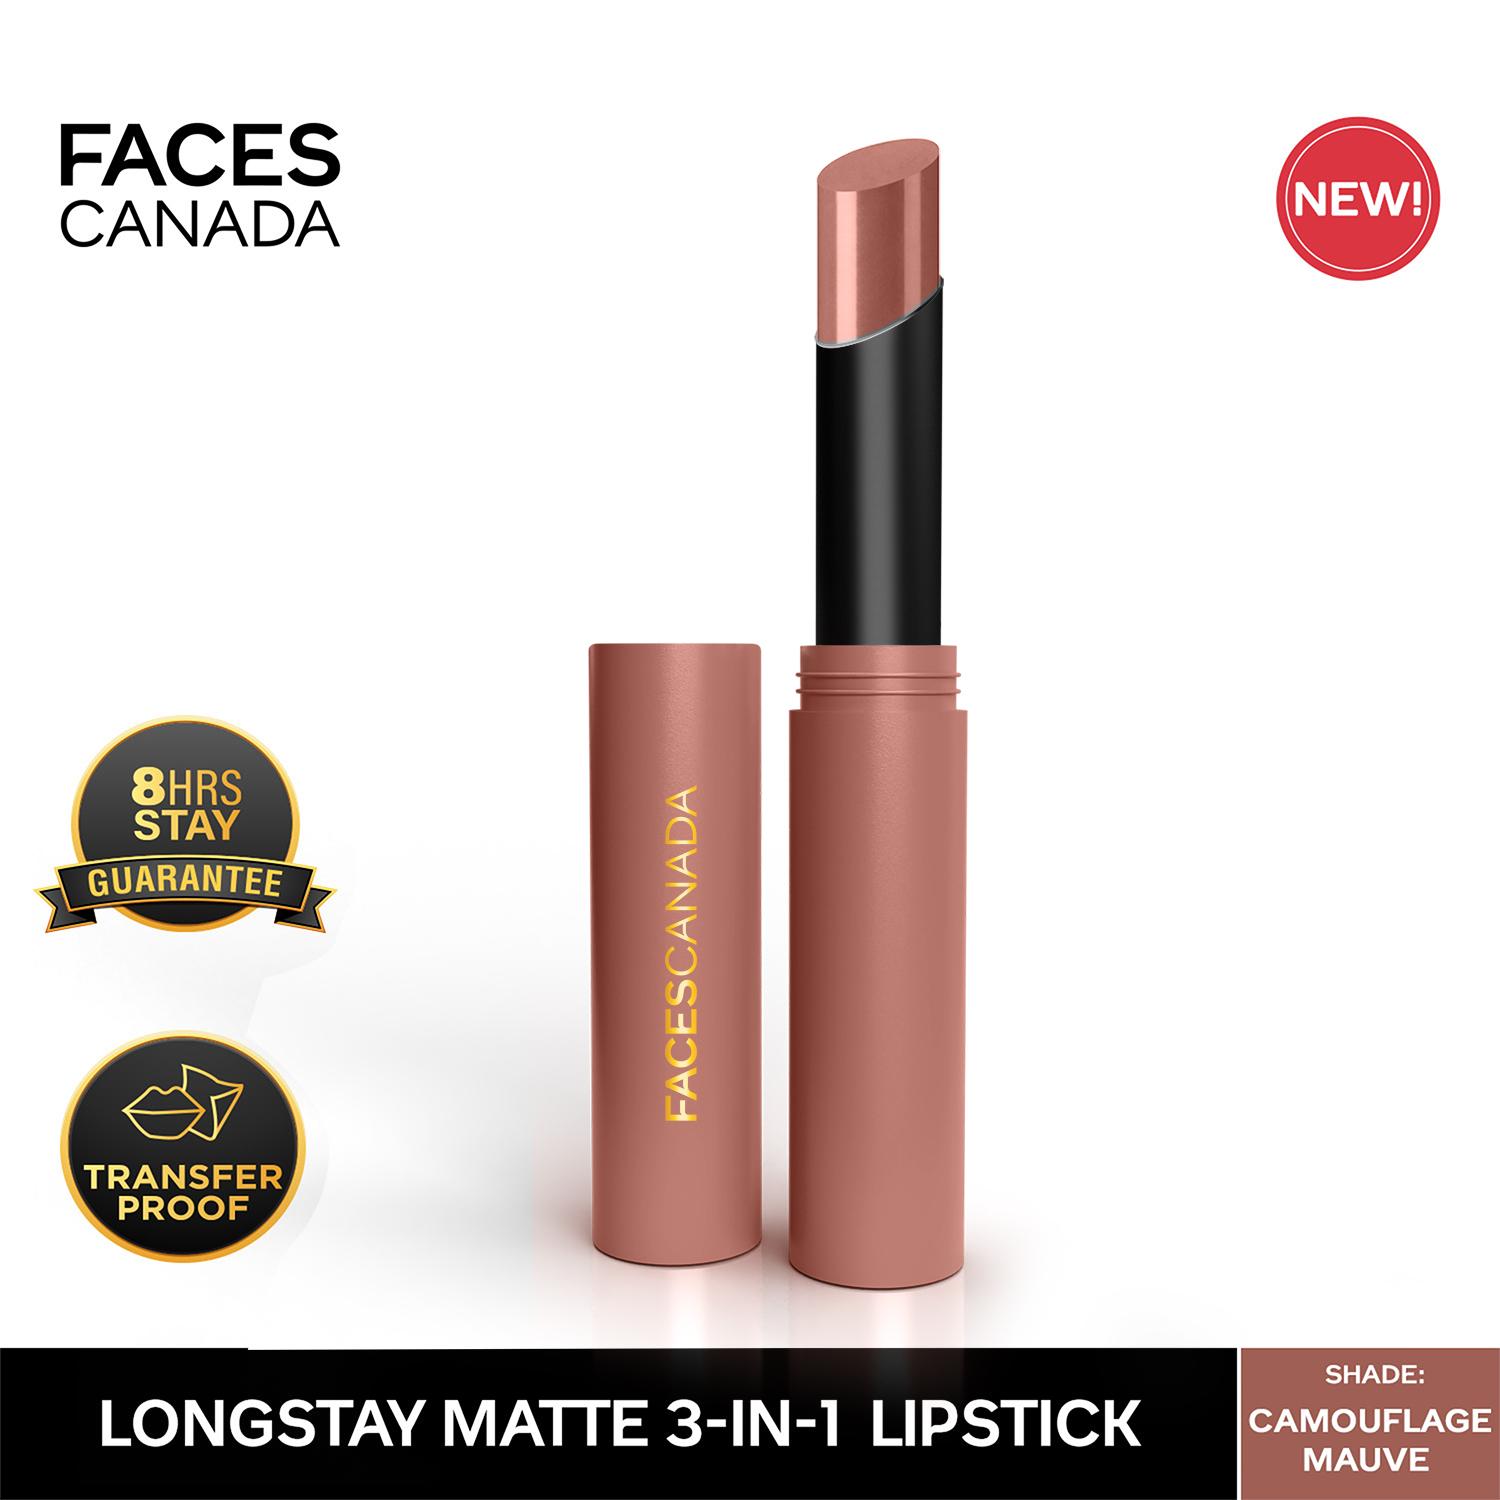 Faces Canada | Faces Canada Long Stay 3-in-1 Matte Lipstick - Camouflage Mauve 07, 8HR Stay, Primer-Infused (2 g)